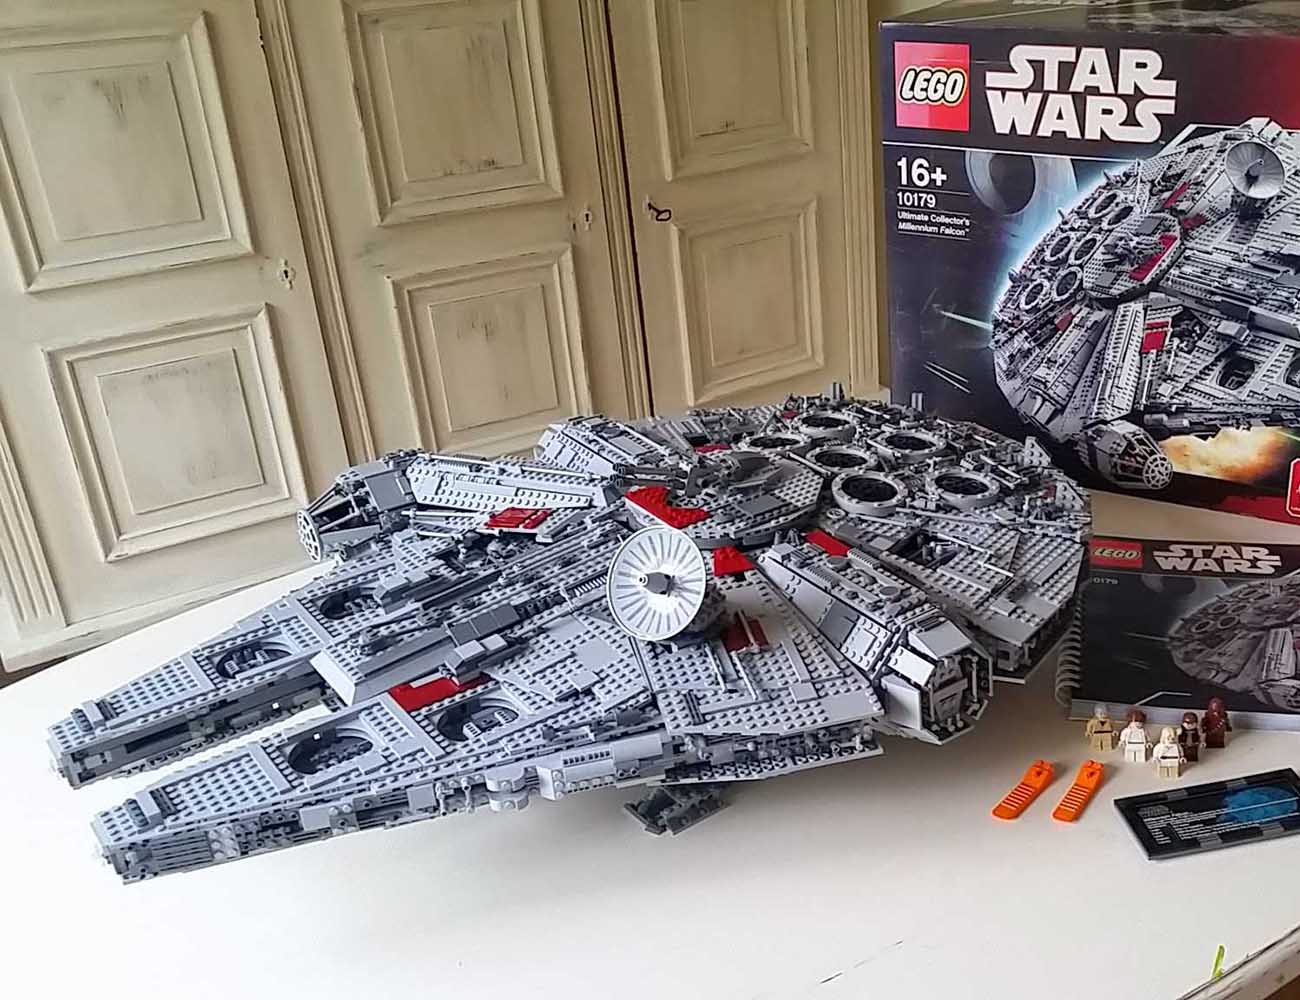 LEGO Star Wars Millennium Falcon is a 7,500+ piece project and collectible for super fans